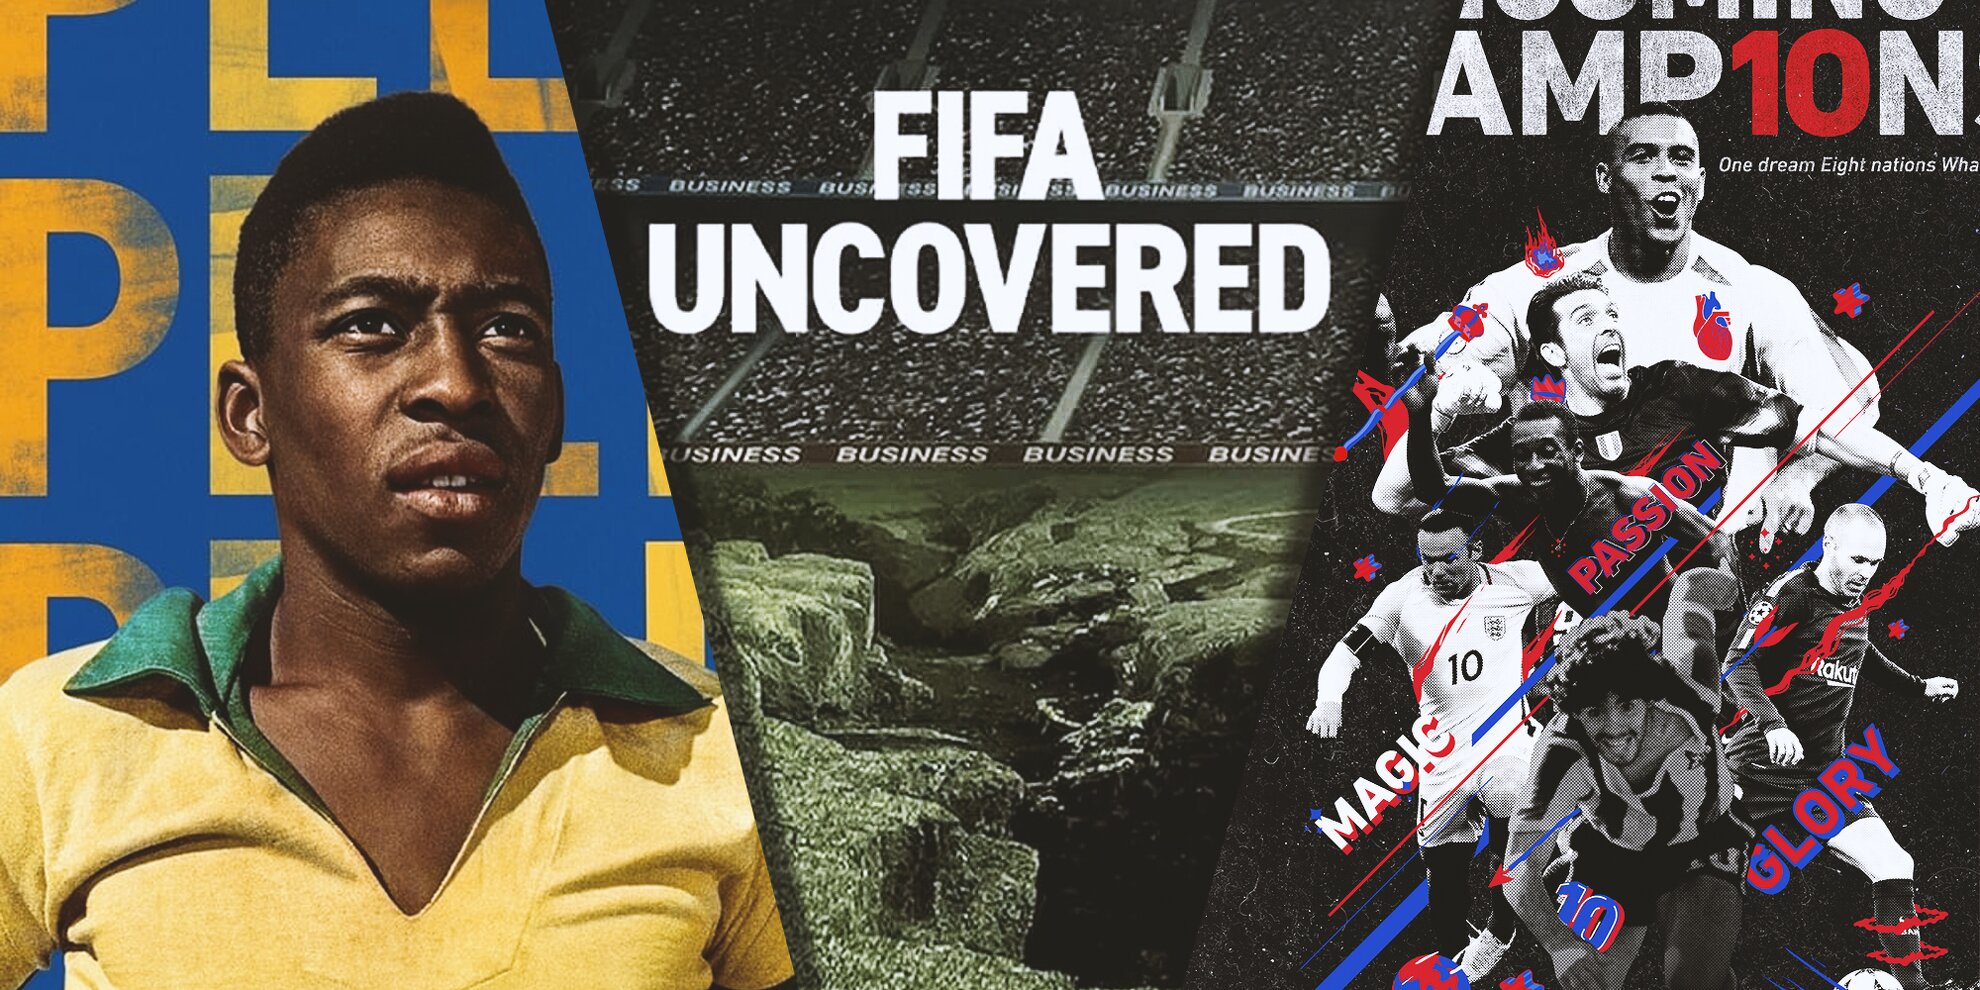 Top 10 documentaries you should watch before the start of the 2022 FIFA World Cup